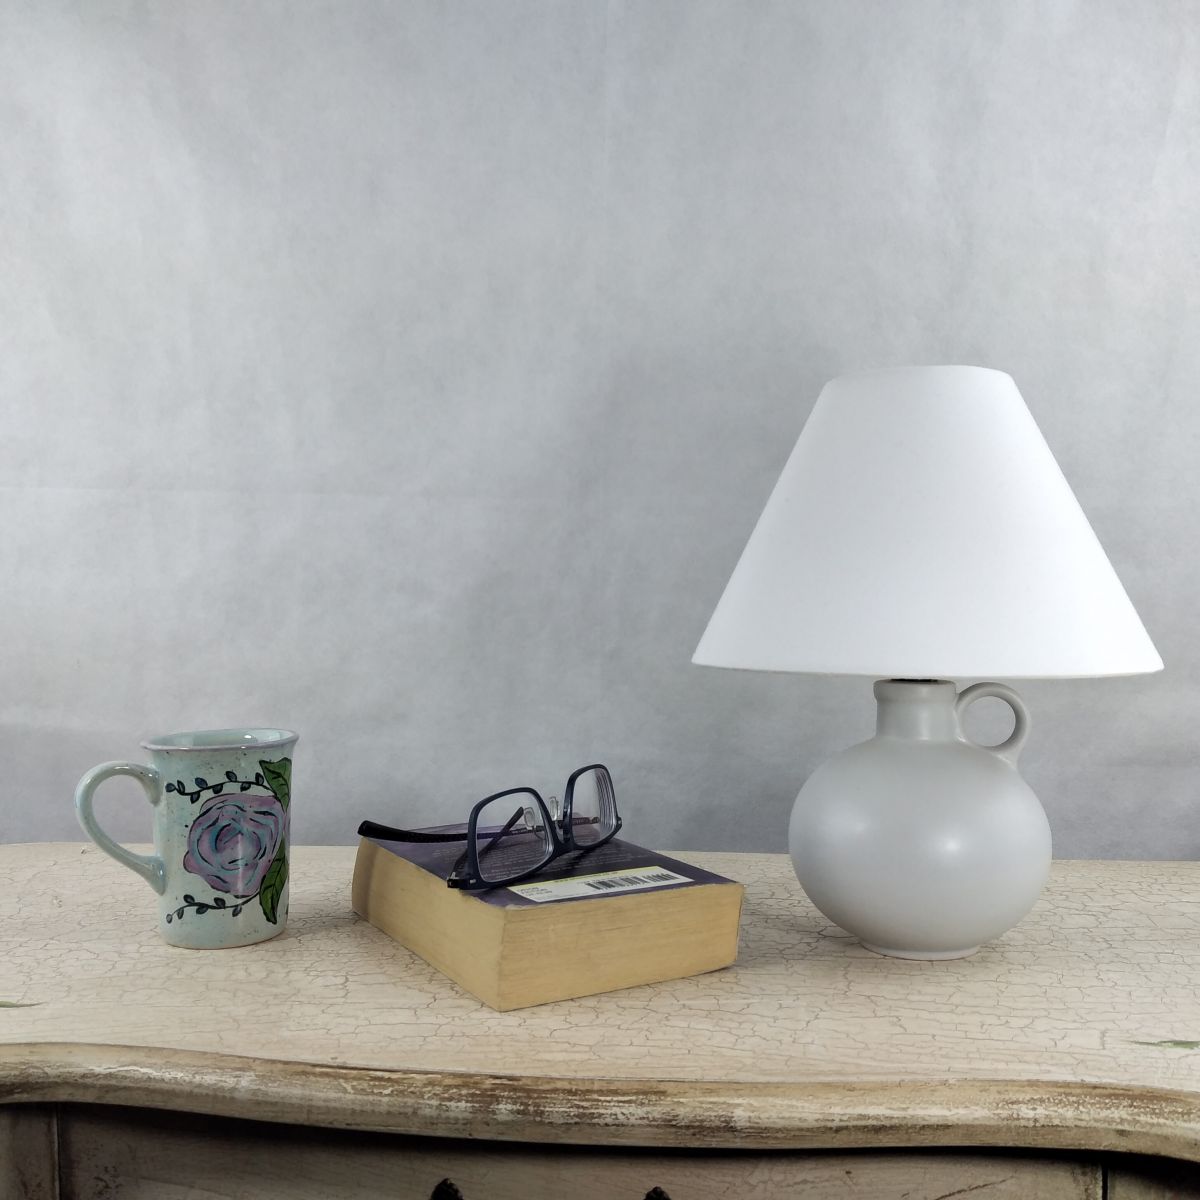 The Grey table light